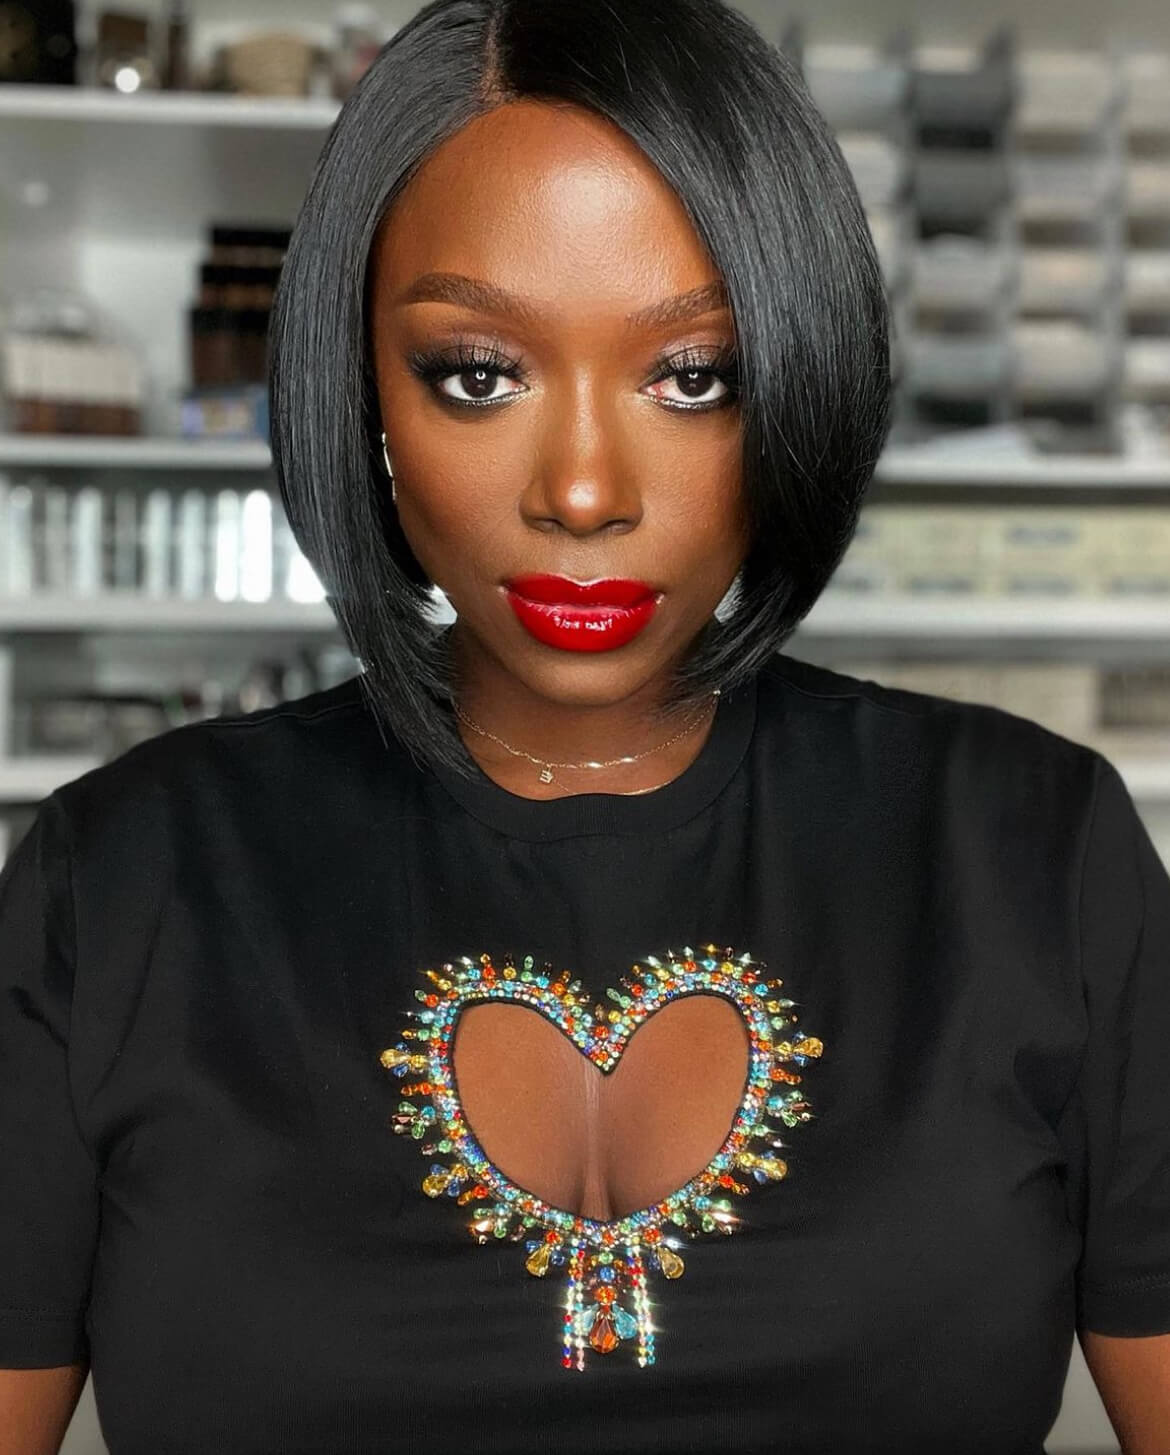 Sheika Daley is an International Makeup Artist for Lancôme. According to The Hollywood Reporter, she boasts an A-list clientele that includes Zendaya, Issa Rae, Kelly Rowland, and Letitia Wright. 